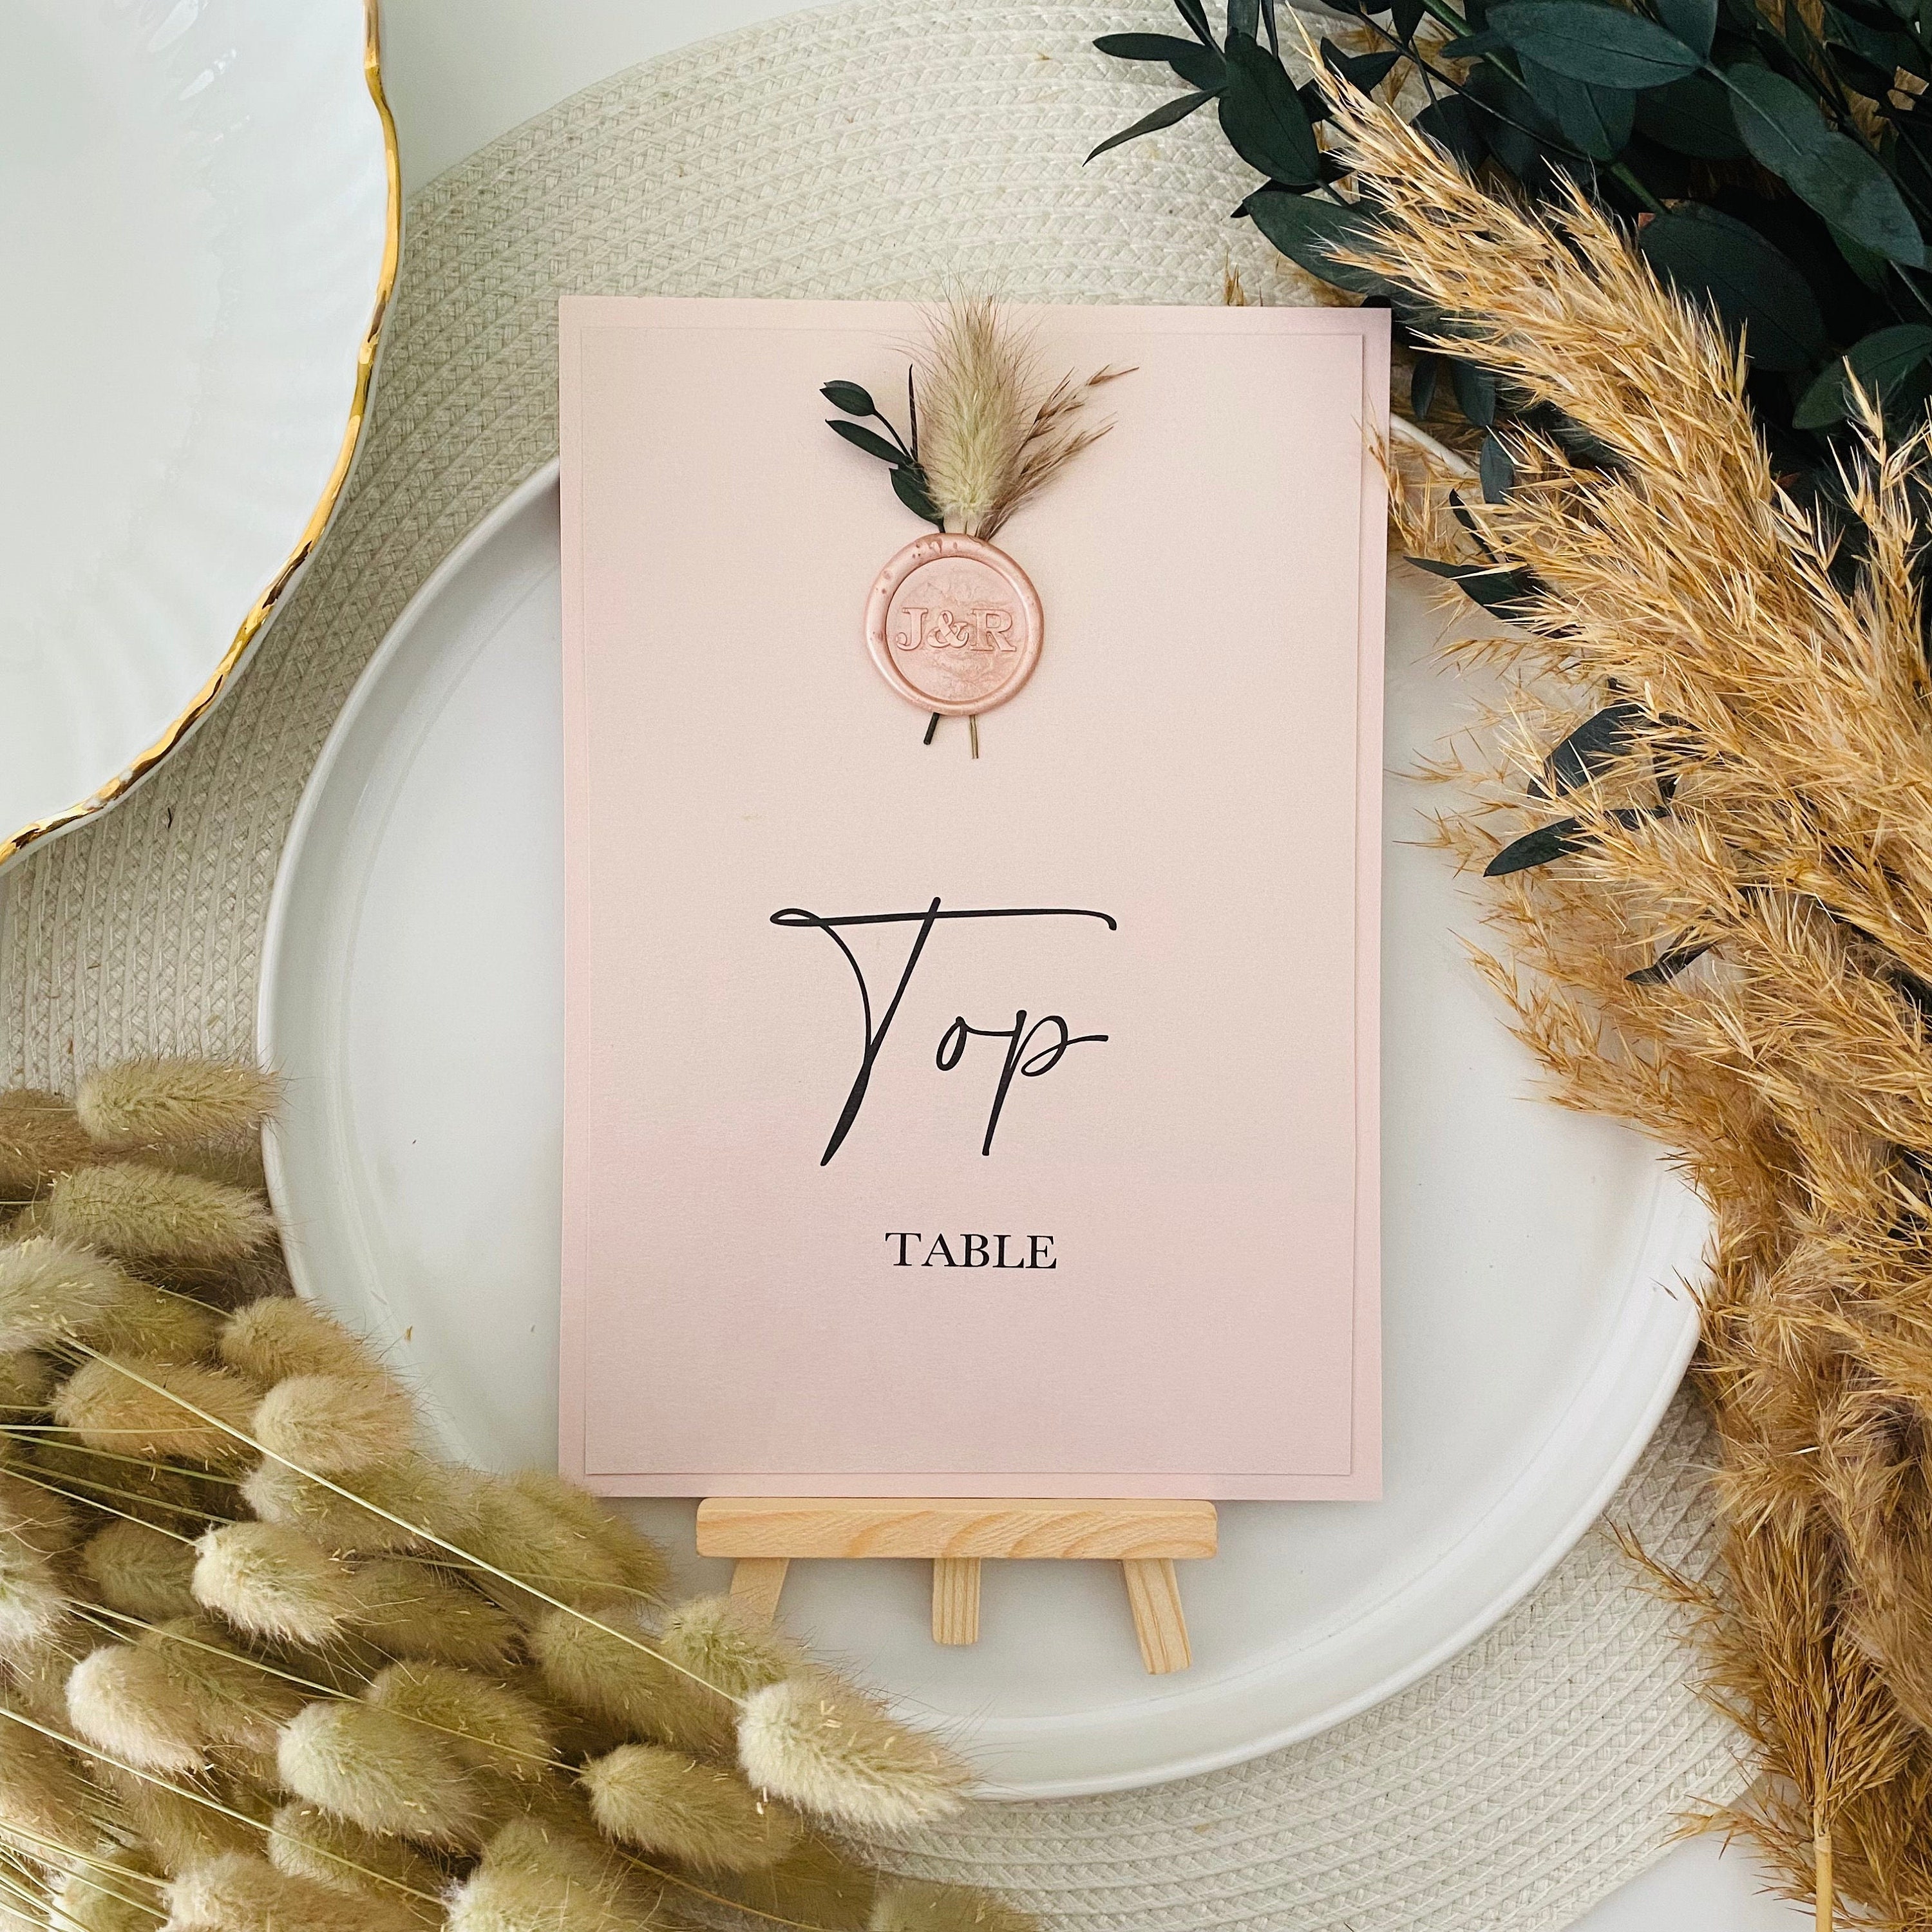 Blush Pink, Gold & Eucalyptus Dried Flowers Table Numbers/Names